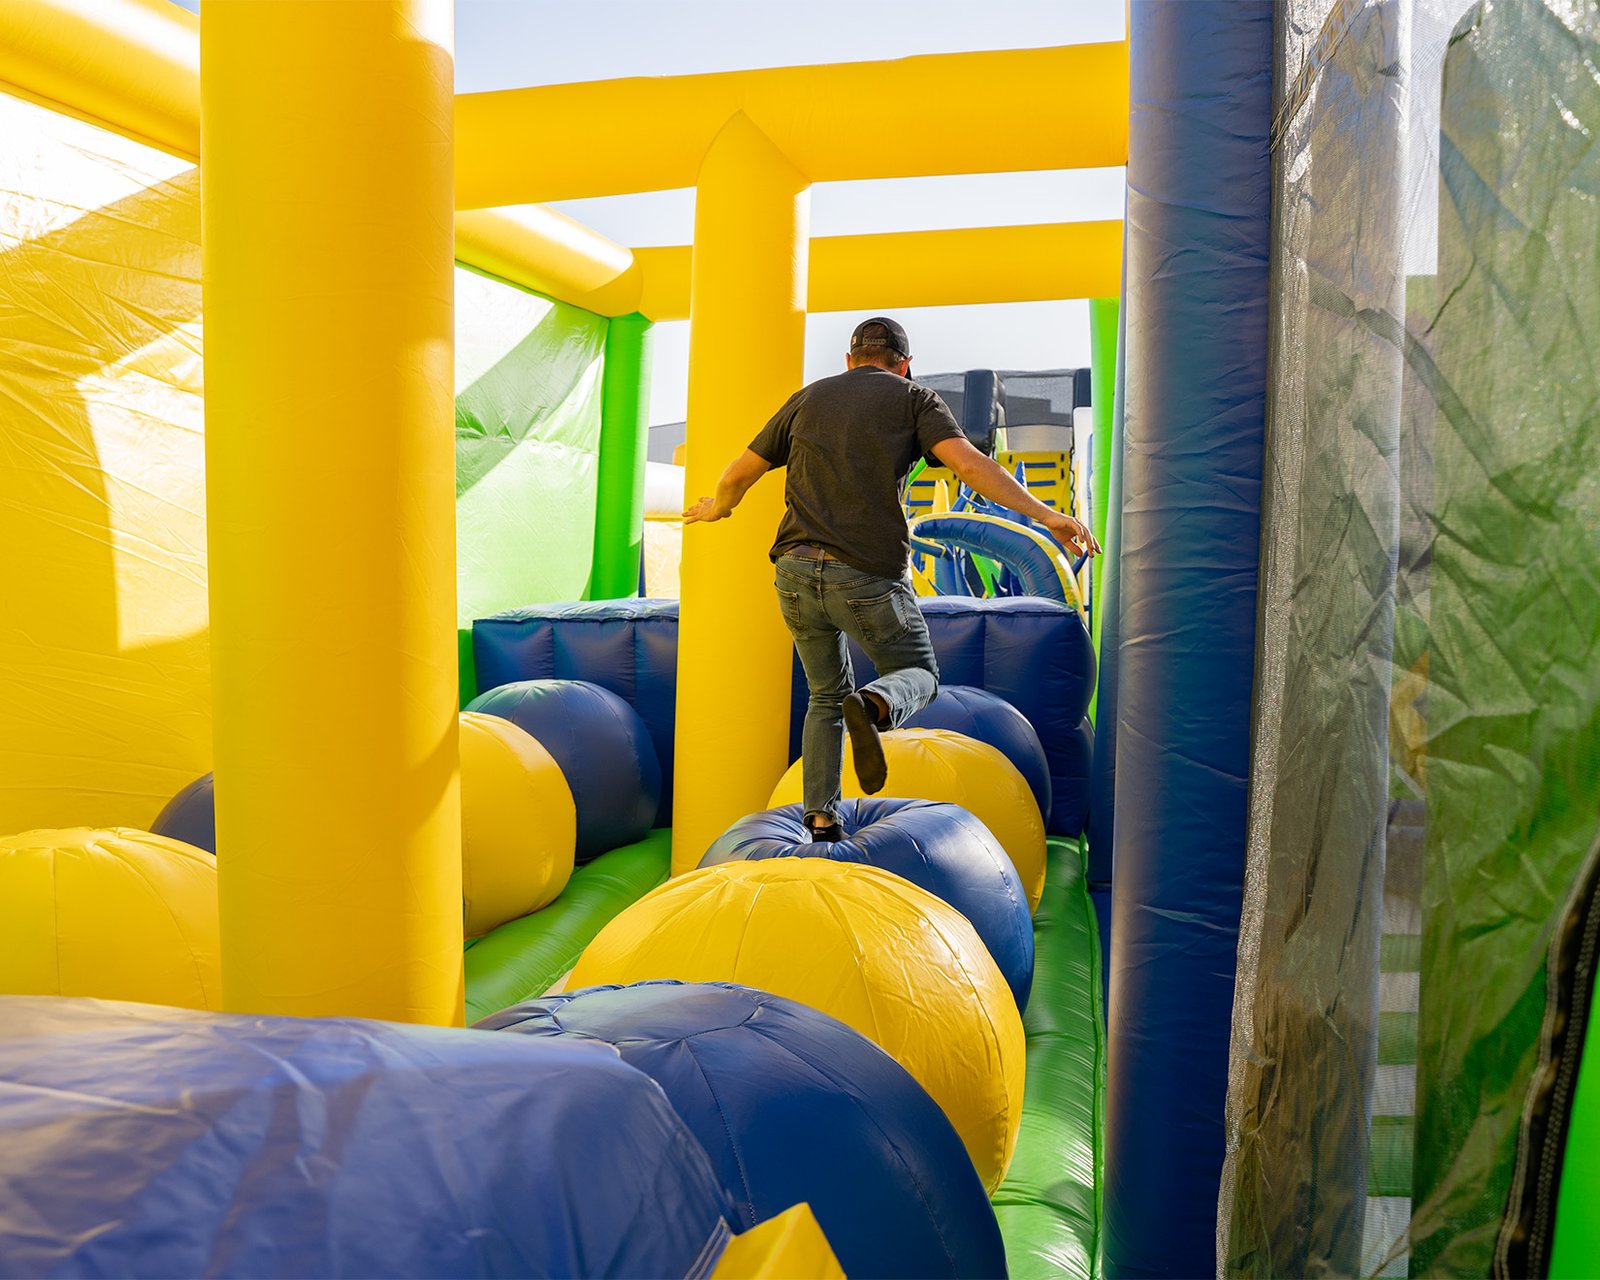 Man running through obstacle course at one of the world's largest bounce houses